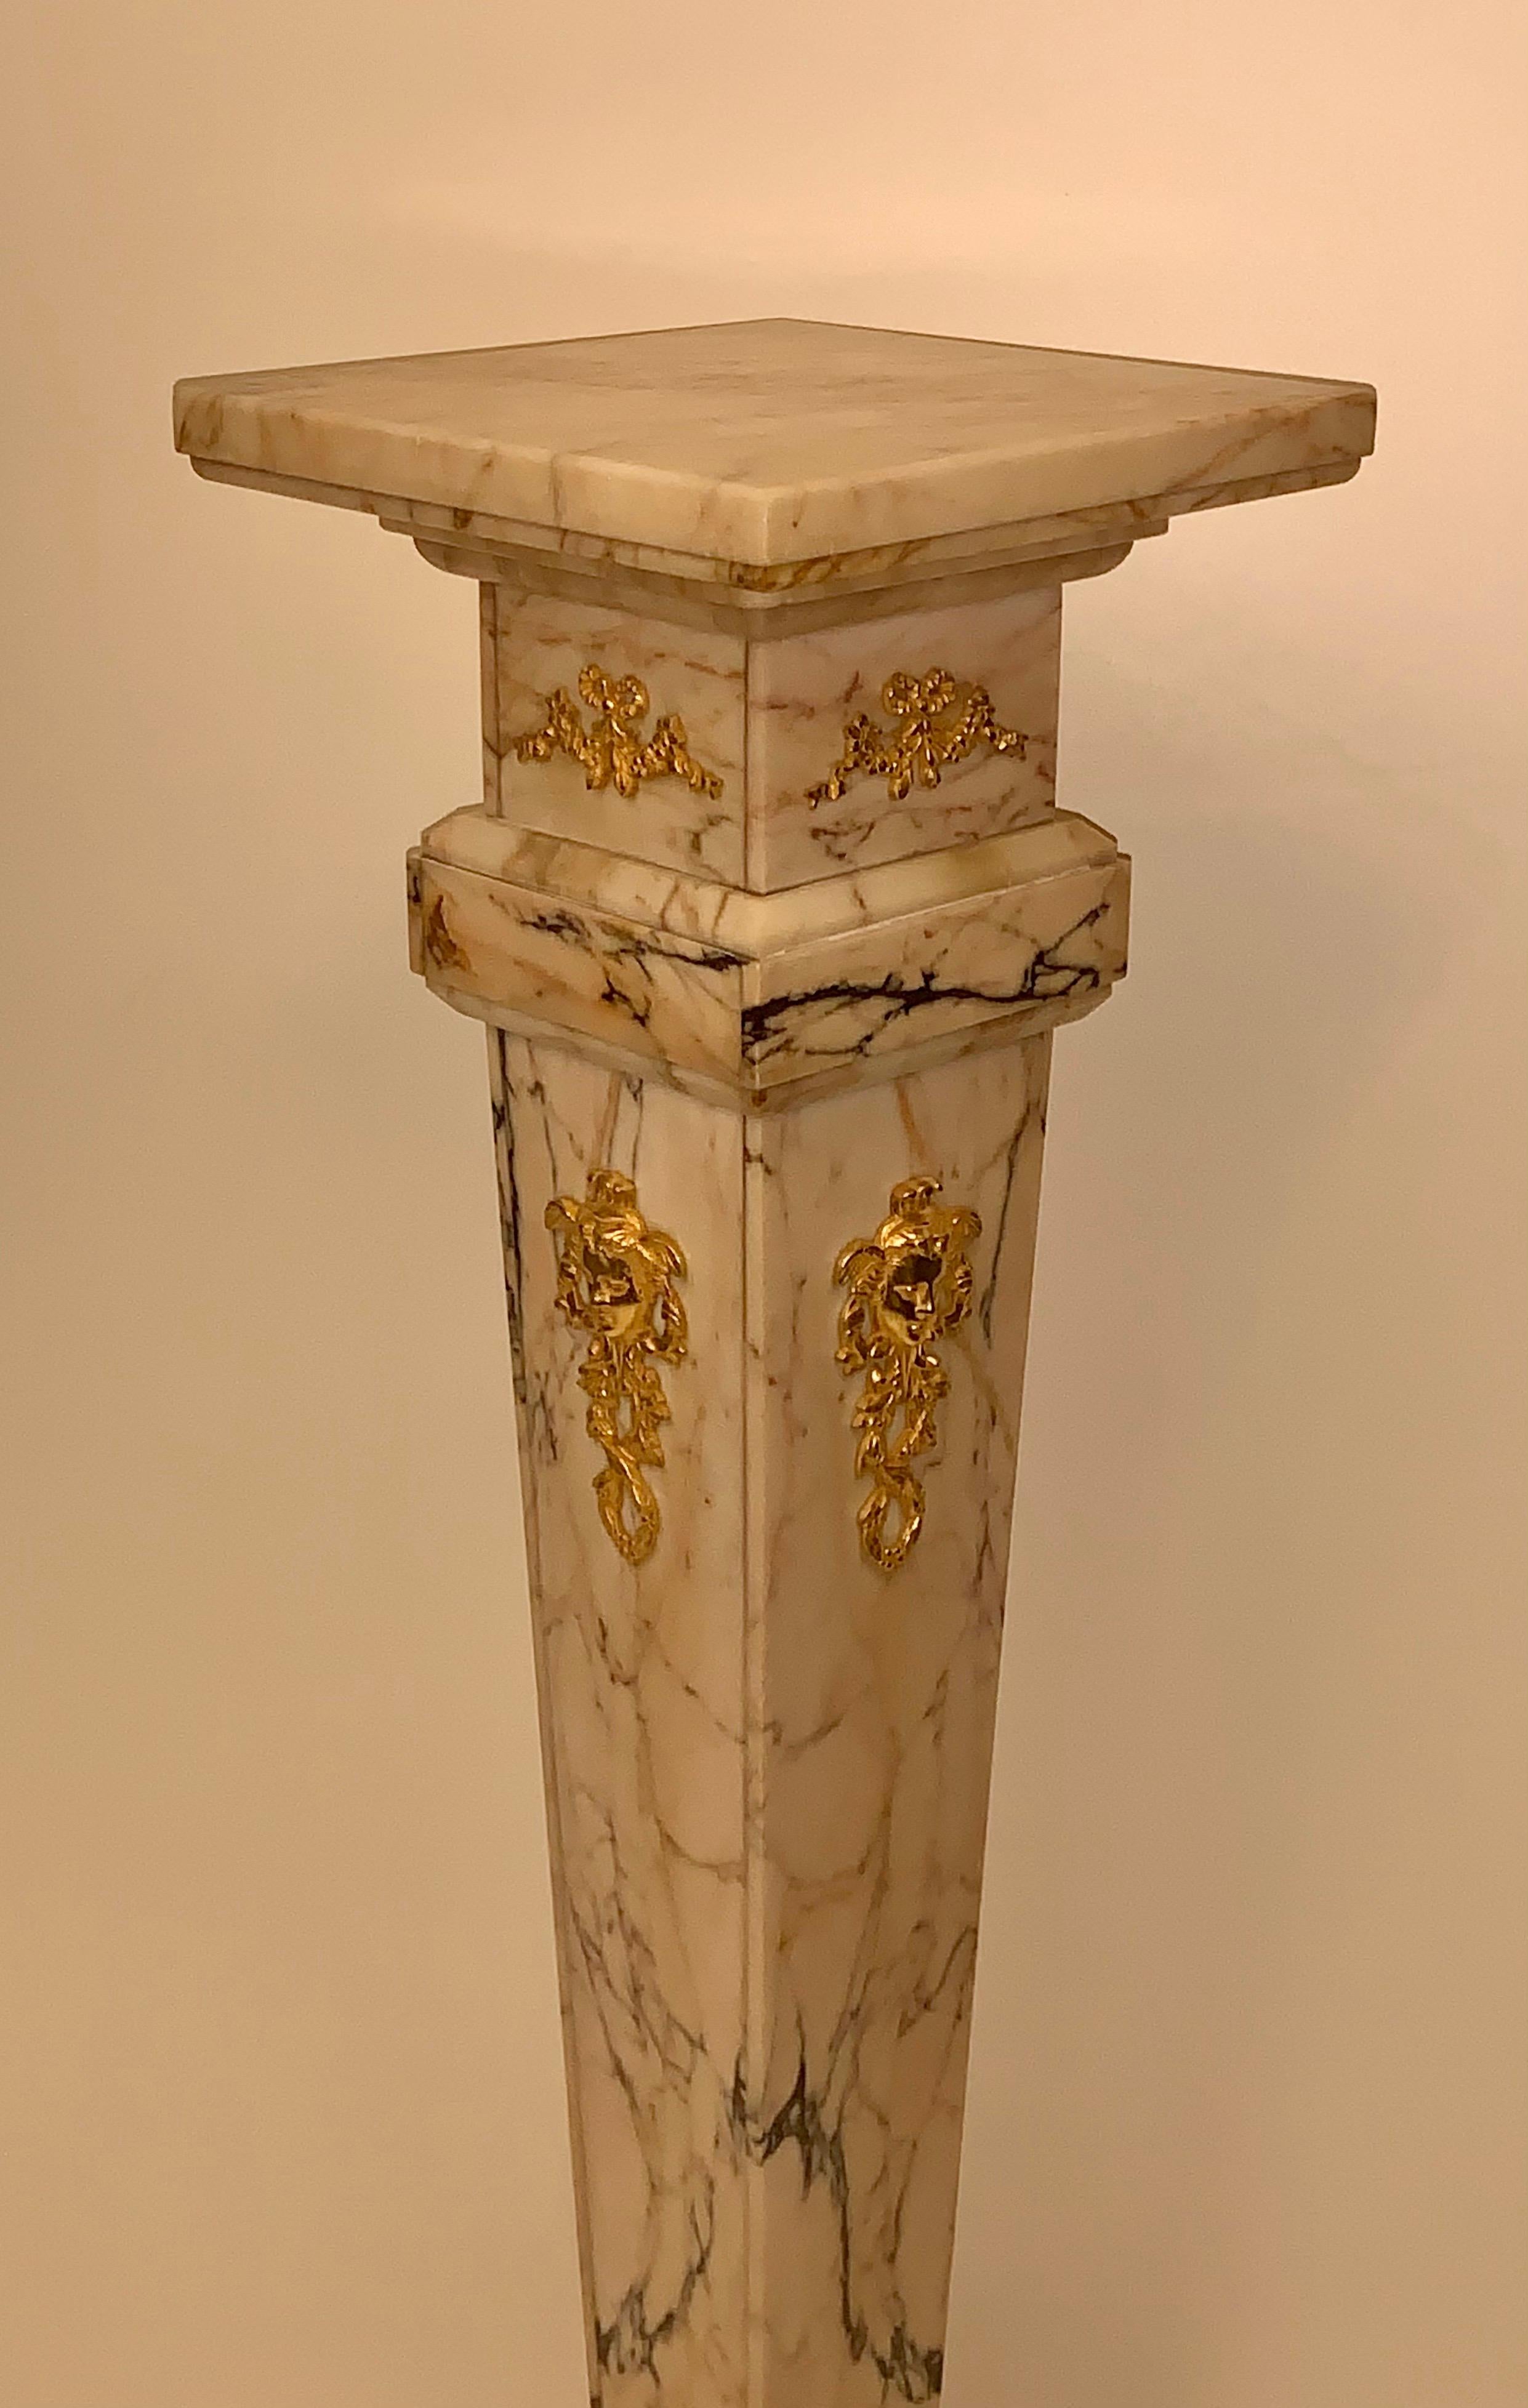 A large French antique gilt bronze mounted marble pedestal
Having a central female gilt bronze mount with a floral wreath under a rotating top with additional bronze mountings an Elegant French Empire style marble pedestal stand. This classical